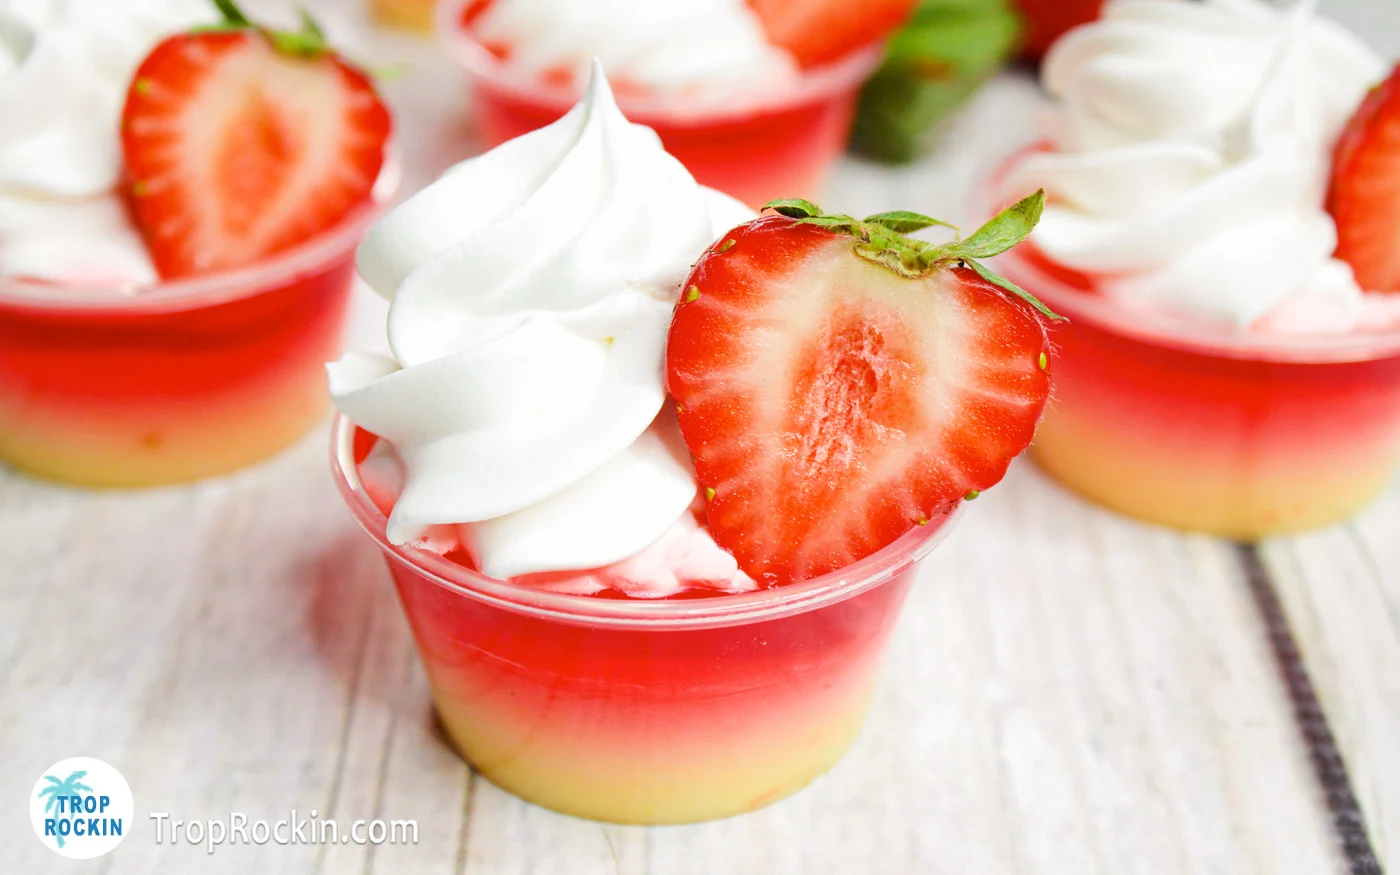 Strawberry Shortcake Jello Shots with two layers, bottom layer is vanilla pudding mixture, top layer strawberry jello mixture with whipped cream and a strawberry slice on top.